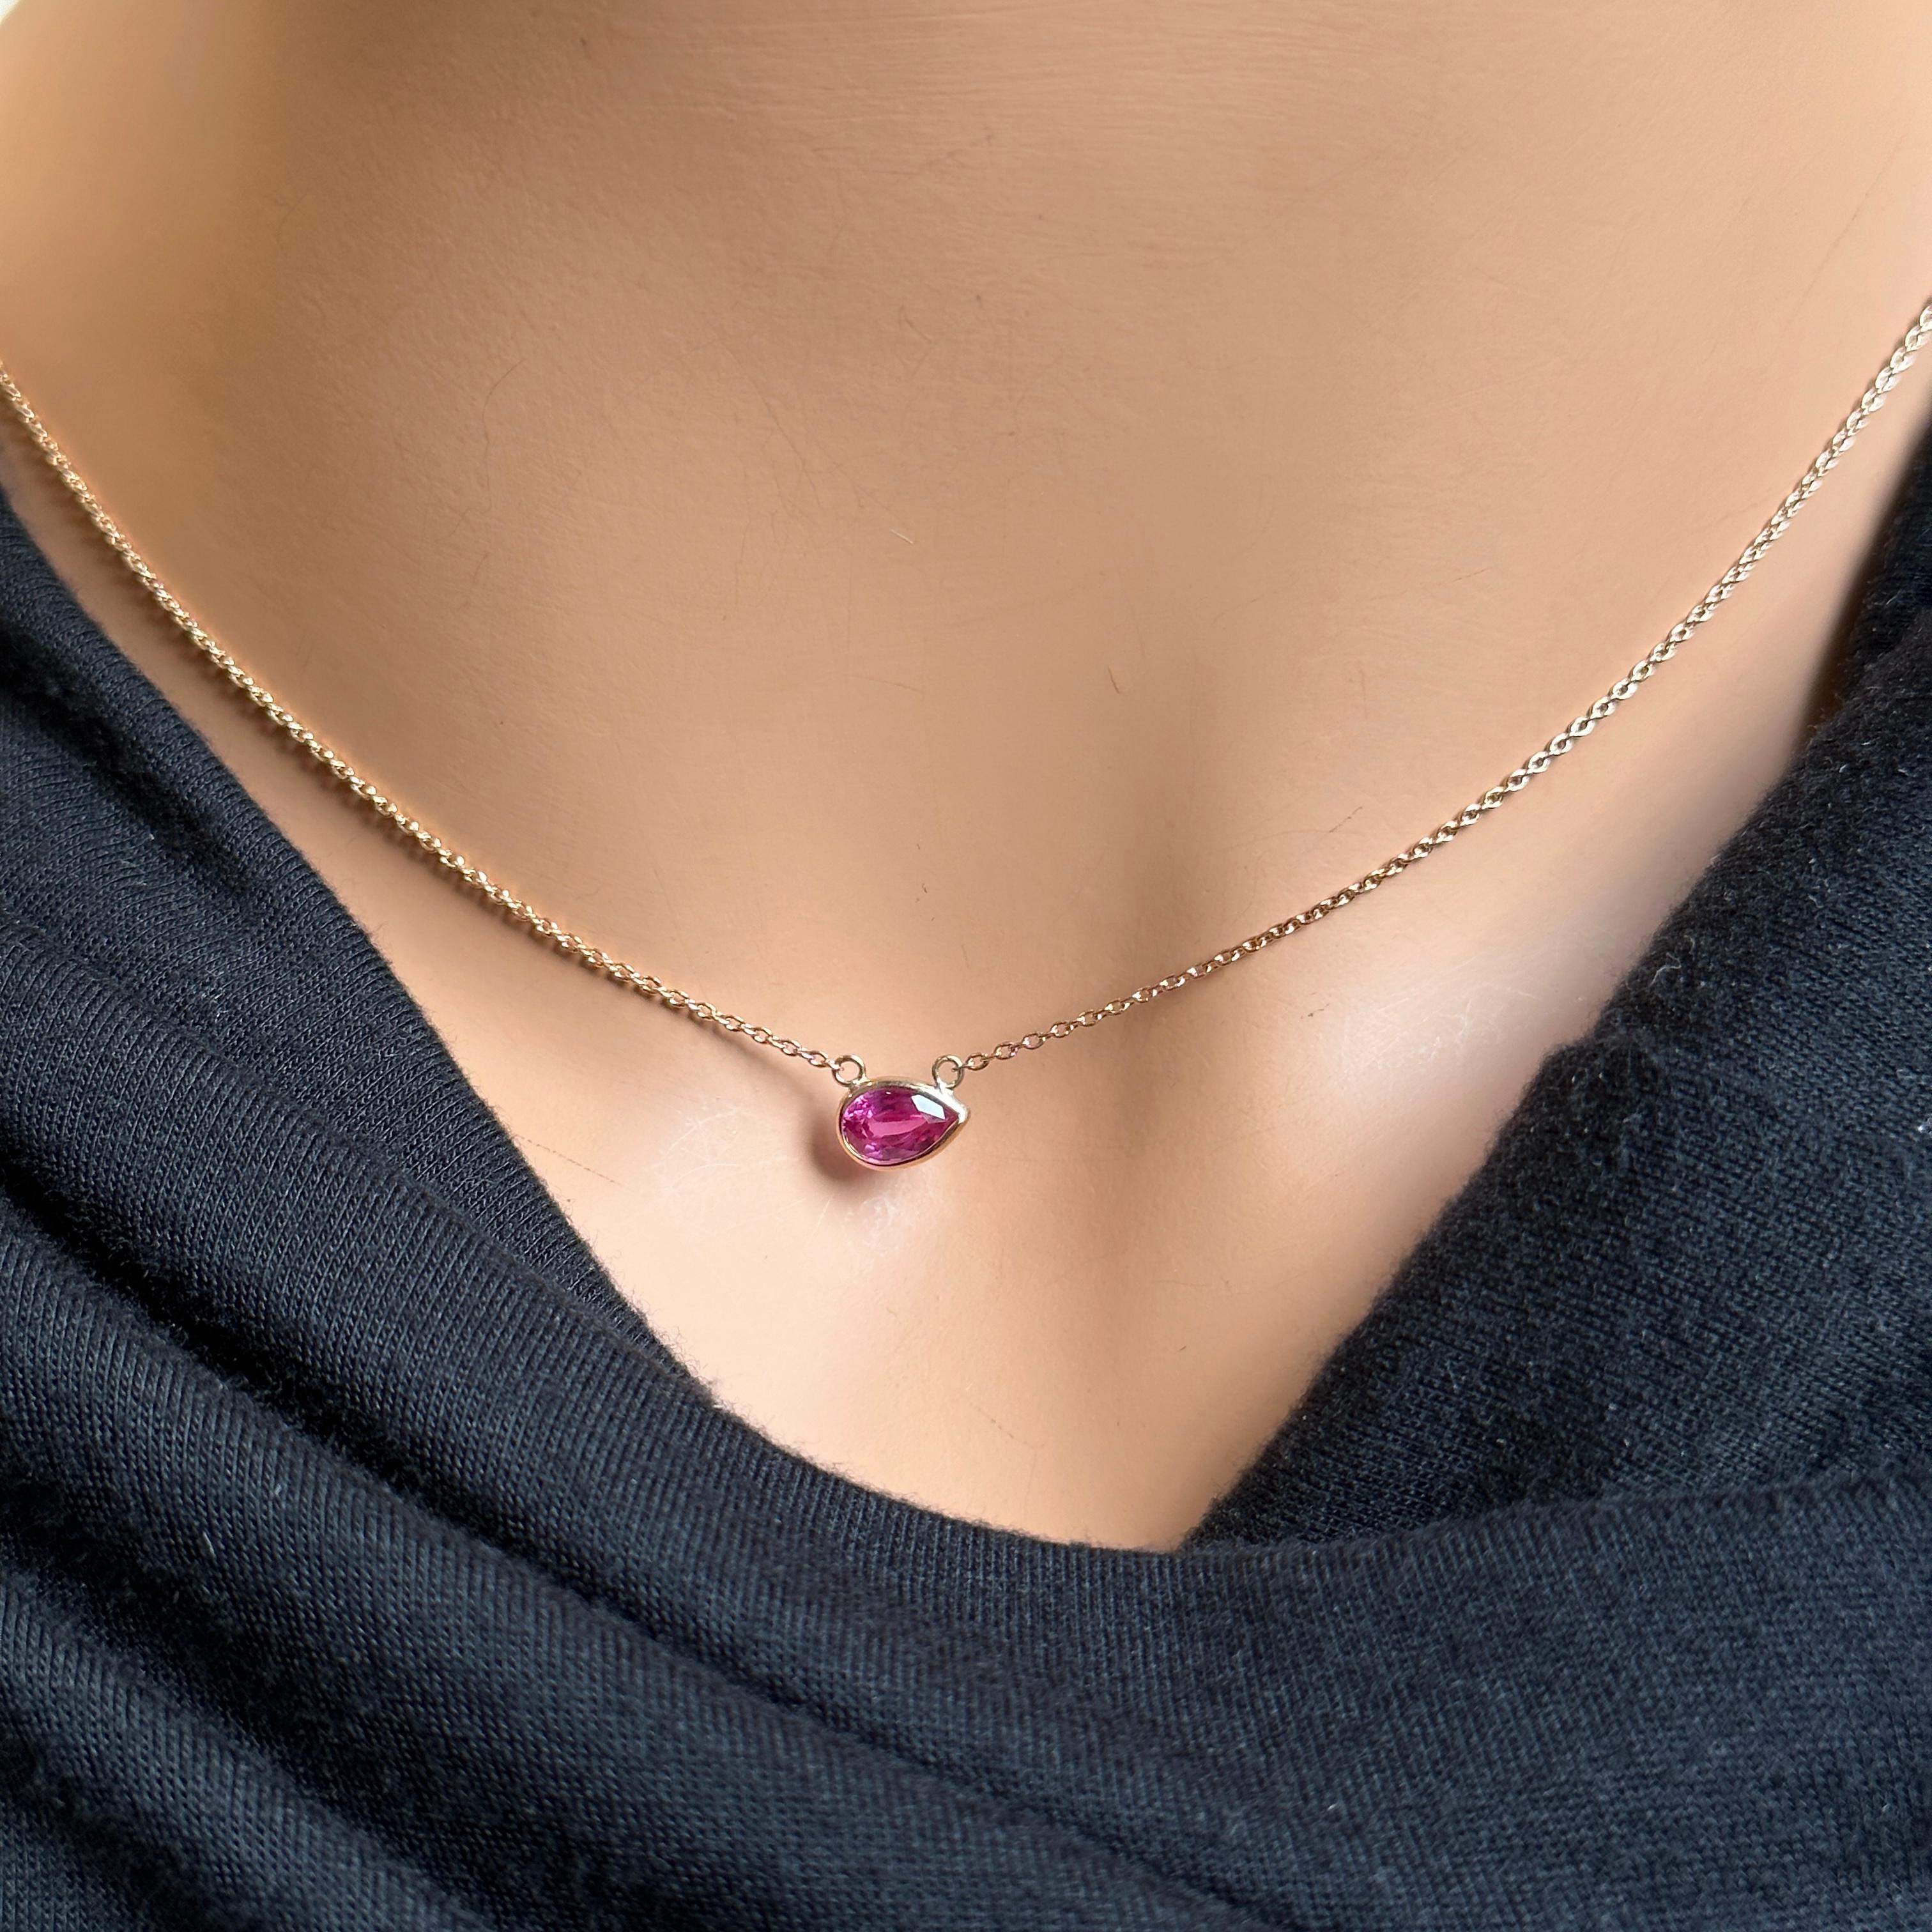 A fashion necklace crafted in 14k rose gold with a main stone of a pear-shaped pink sapphire weighing 1.17 carats and certified as a Sapphire would be a stunning and elegant choice. Pink sapphires are known for their delicate and romantic color, and